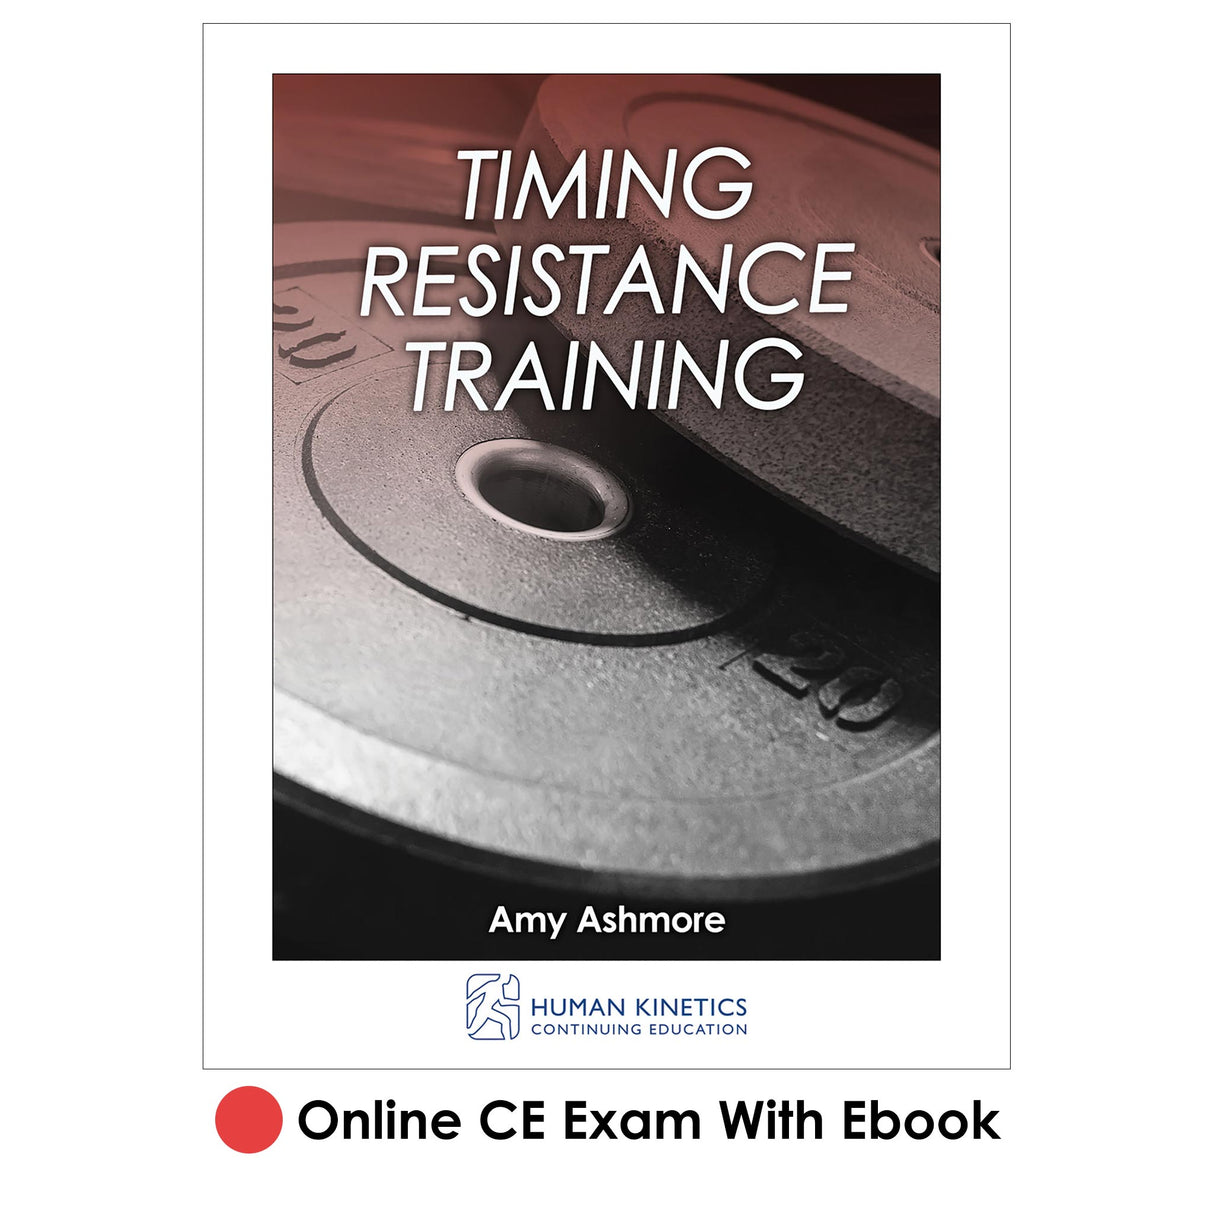 Timing Resistance Training Online CE Exam With Ebook